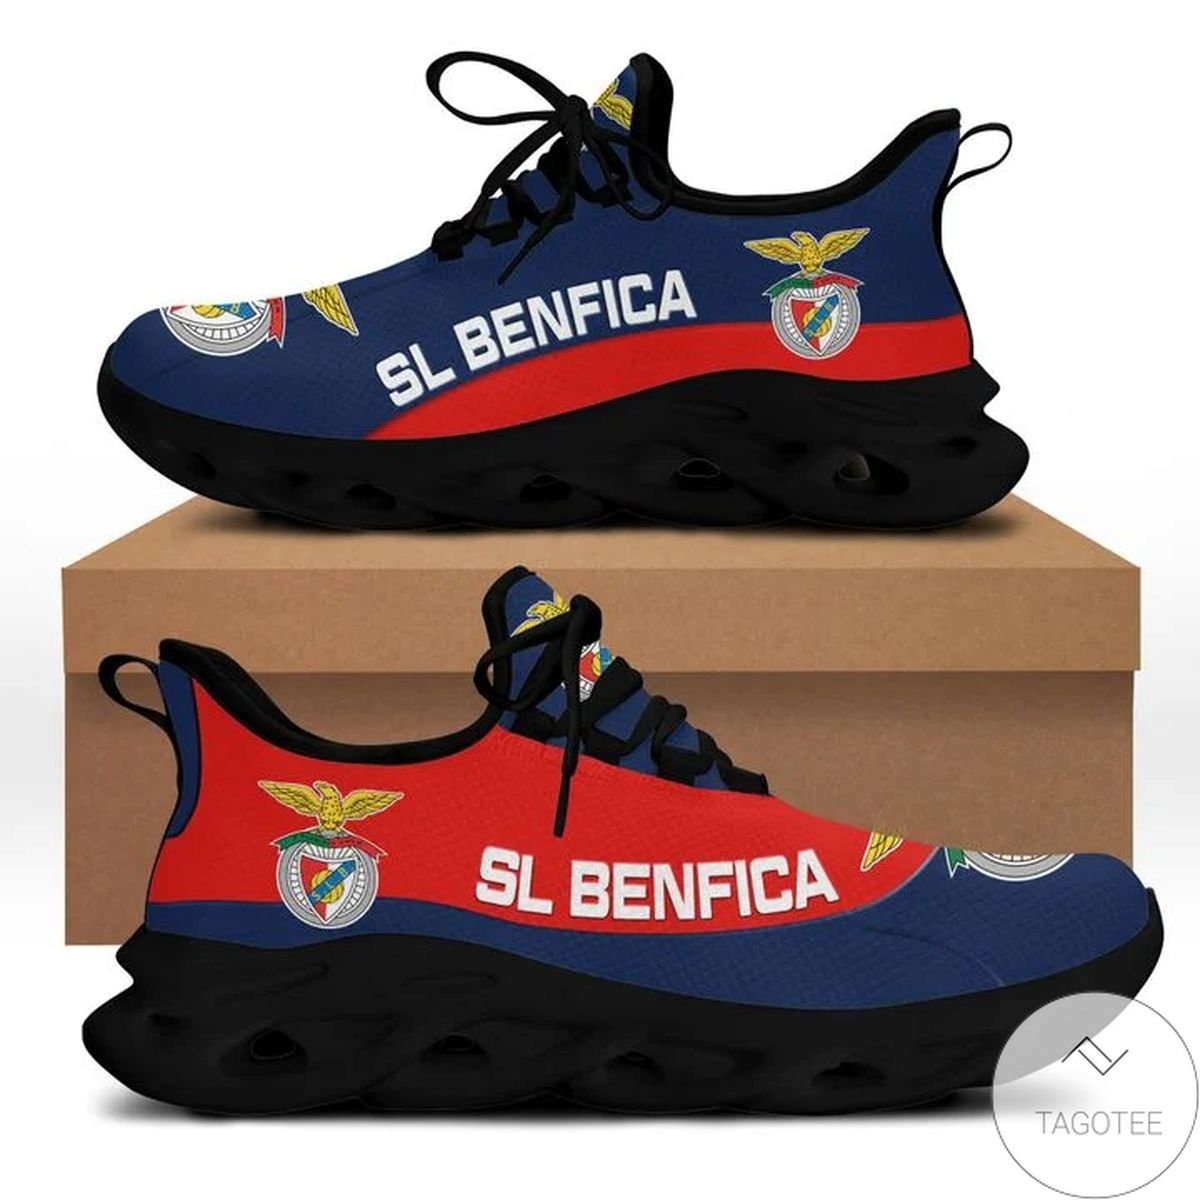 Benfica Yeezy Running Sneaker Max Soul Shoes